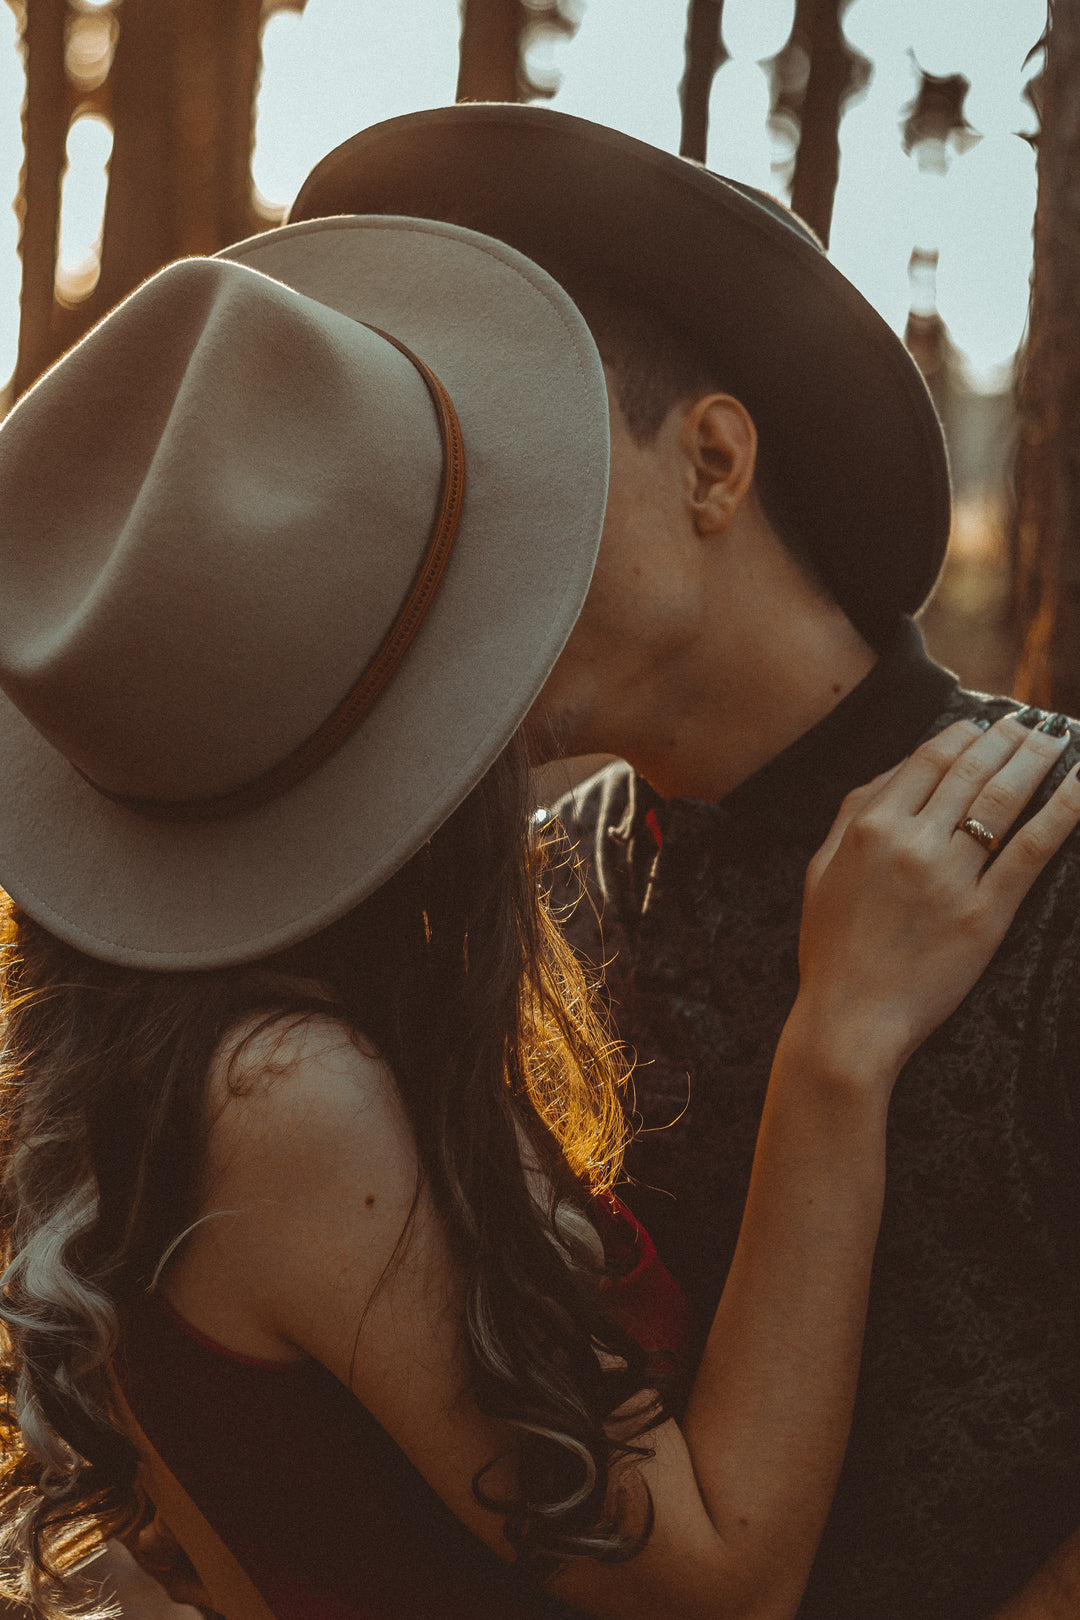 A couple, obscured by wide-brimmed hats, share an intimate moment, highlighting close-up details of their hats and a natural, warm backlight.